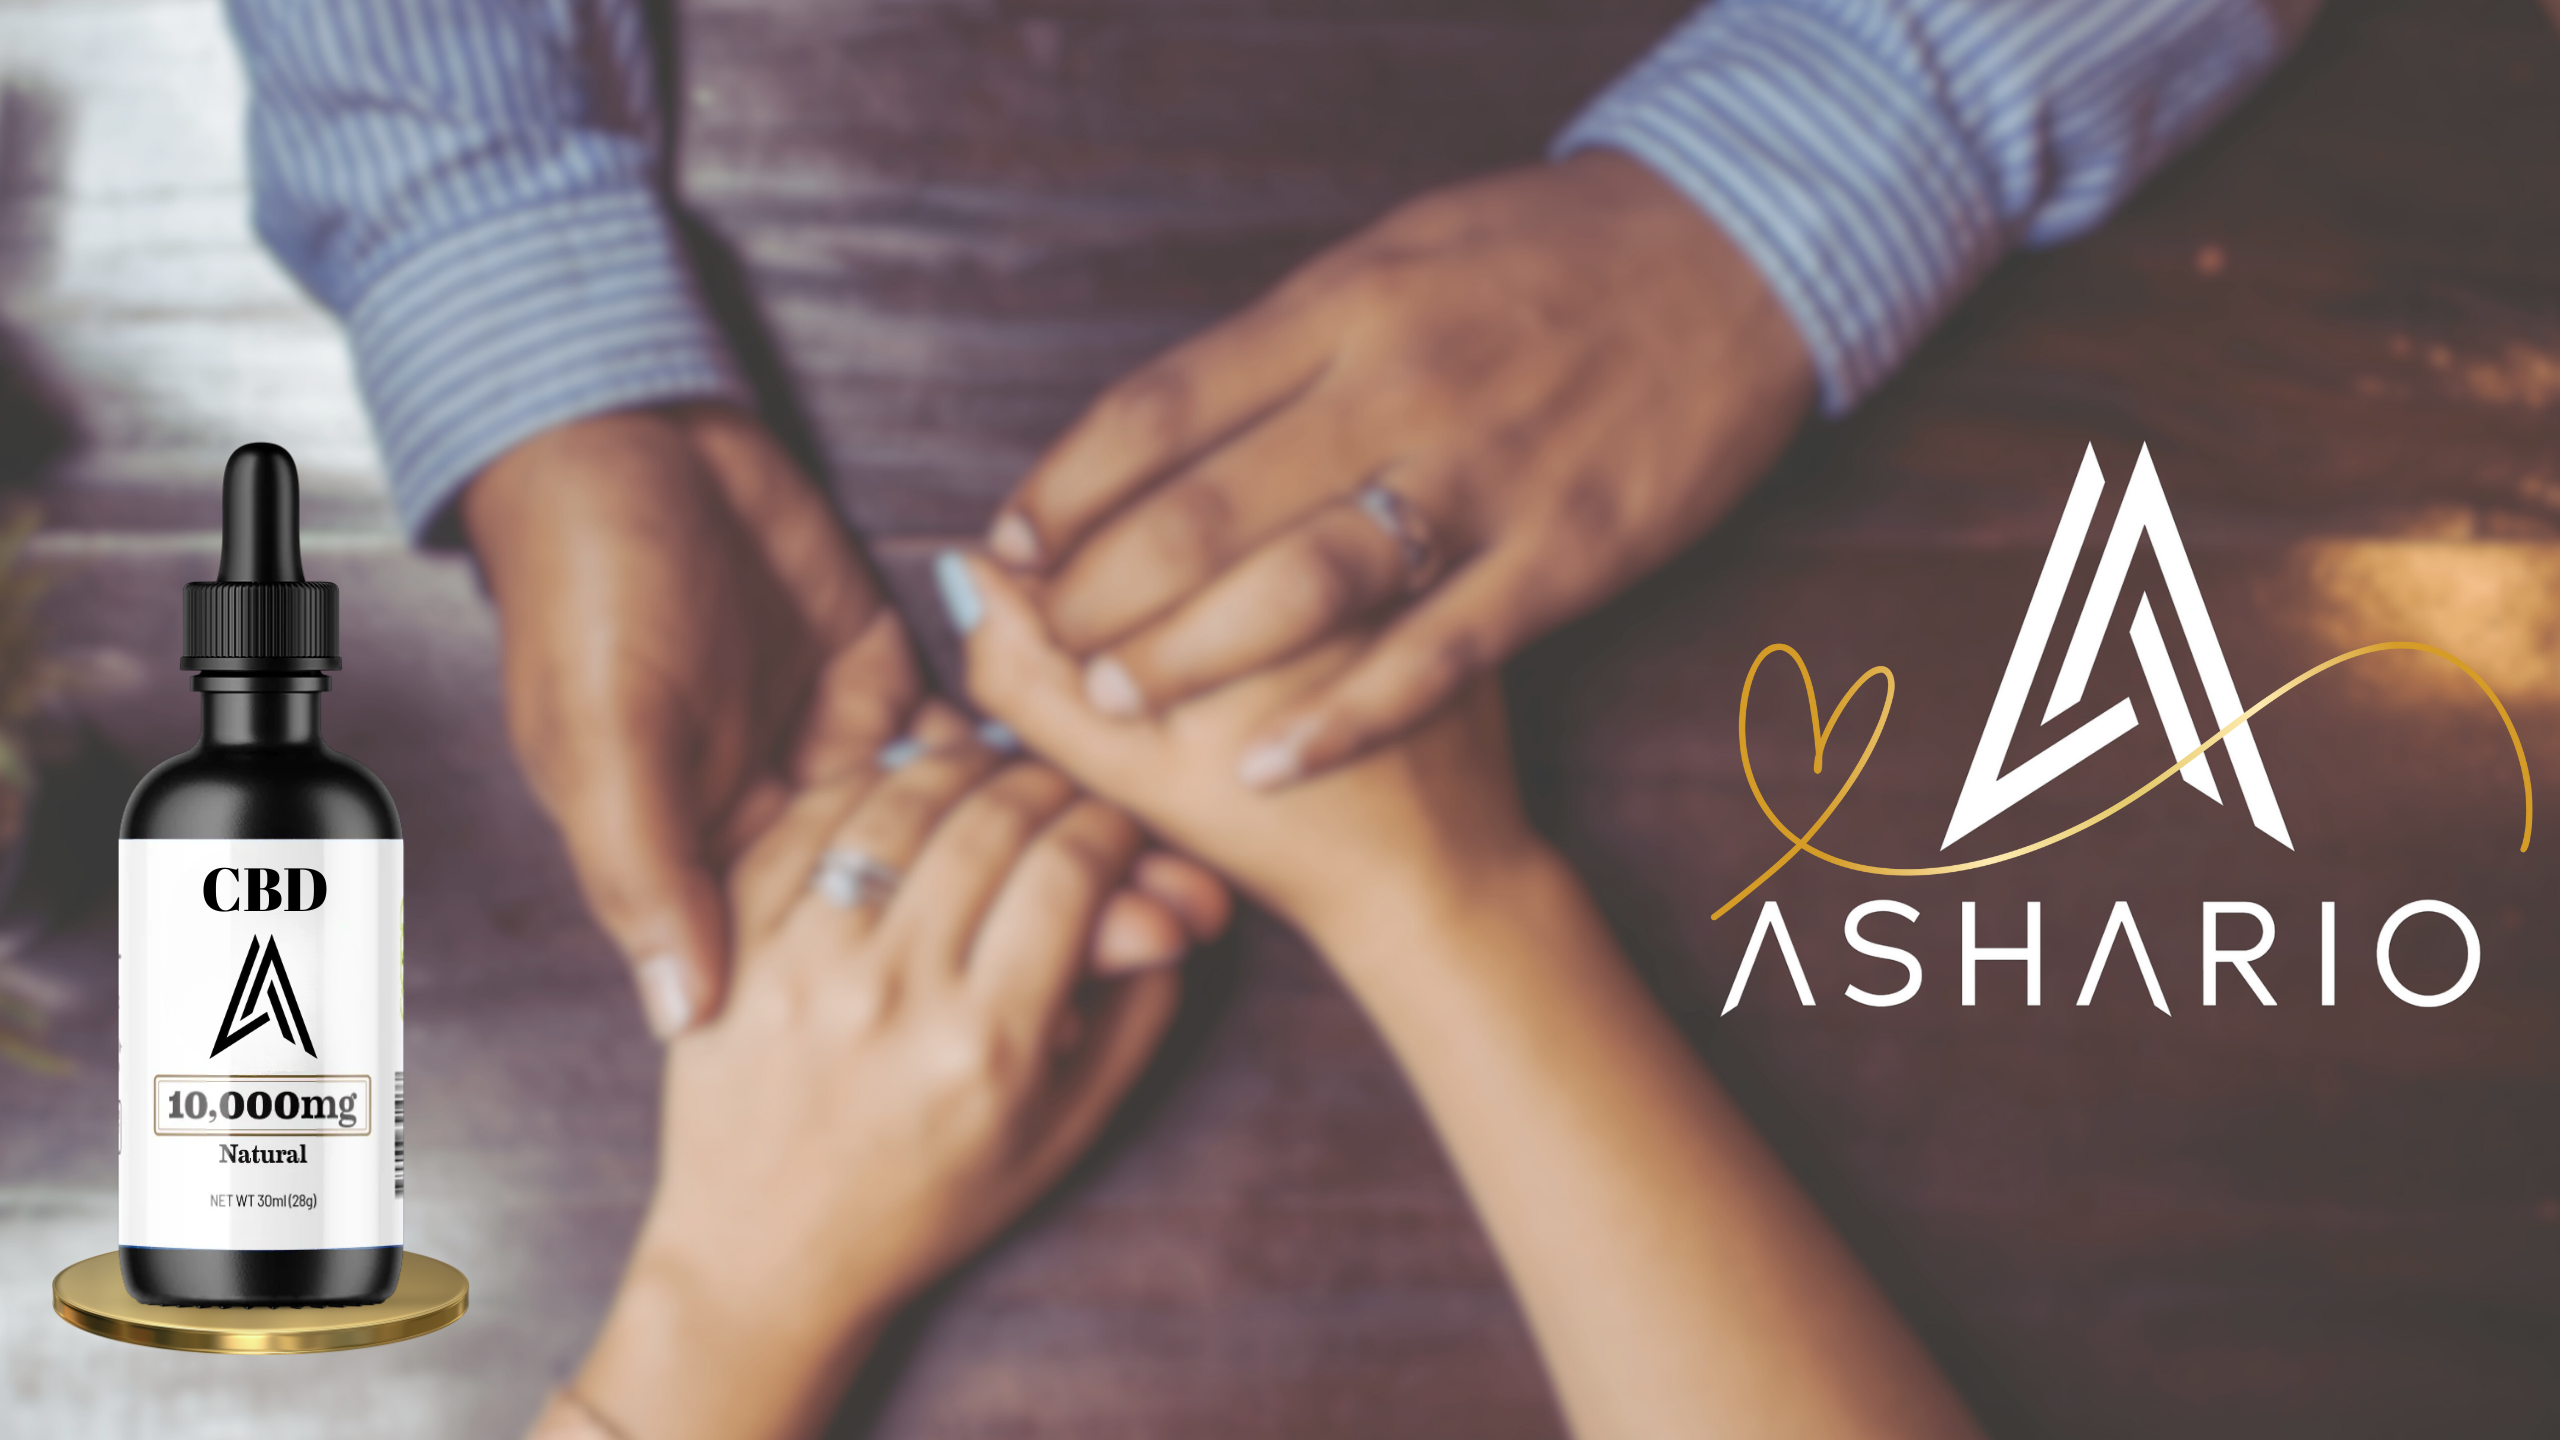 Discover the intimate connection between cannabis and sexuality with Ashario Cannabis. Explore the sensual world of drift pineapple coconut glitches and animal phase sativa as you enhance your intimate moments with your partner.